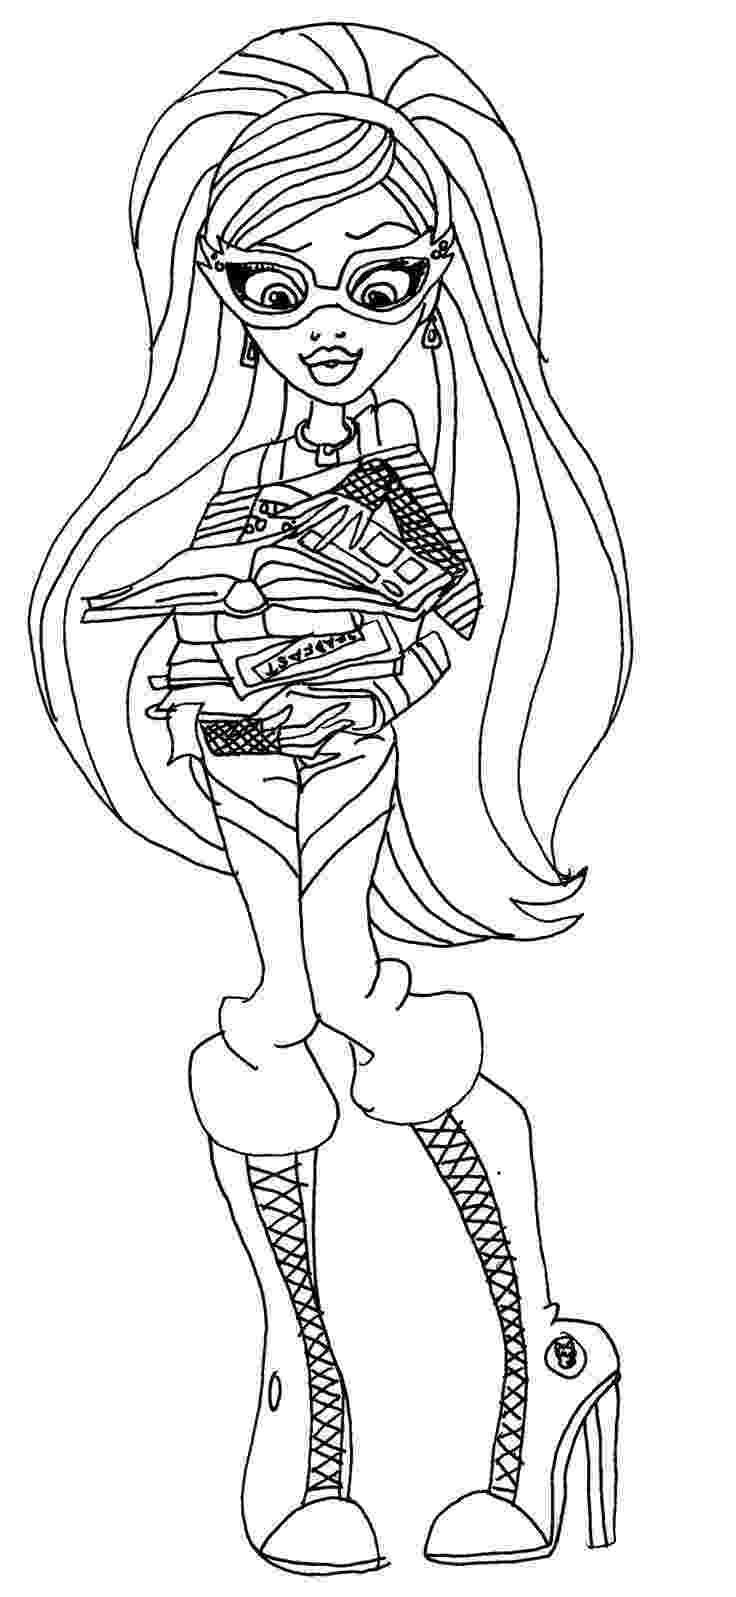 monster high colouring sheets 37 best images about colouring monster high on pinterest sheets monster colouring high 